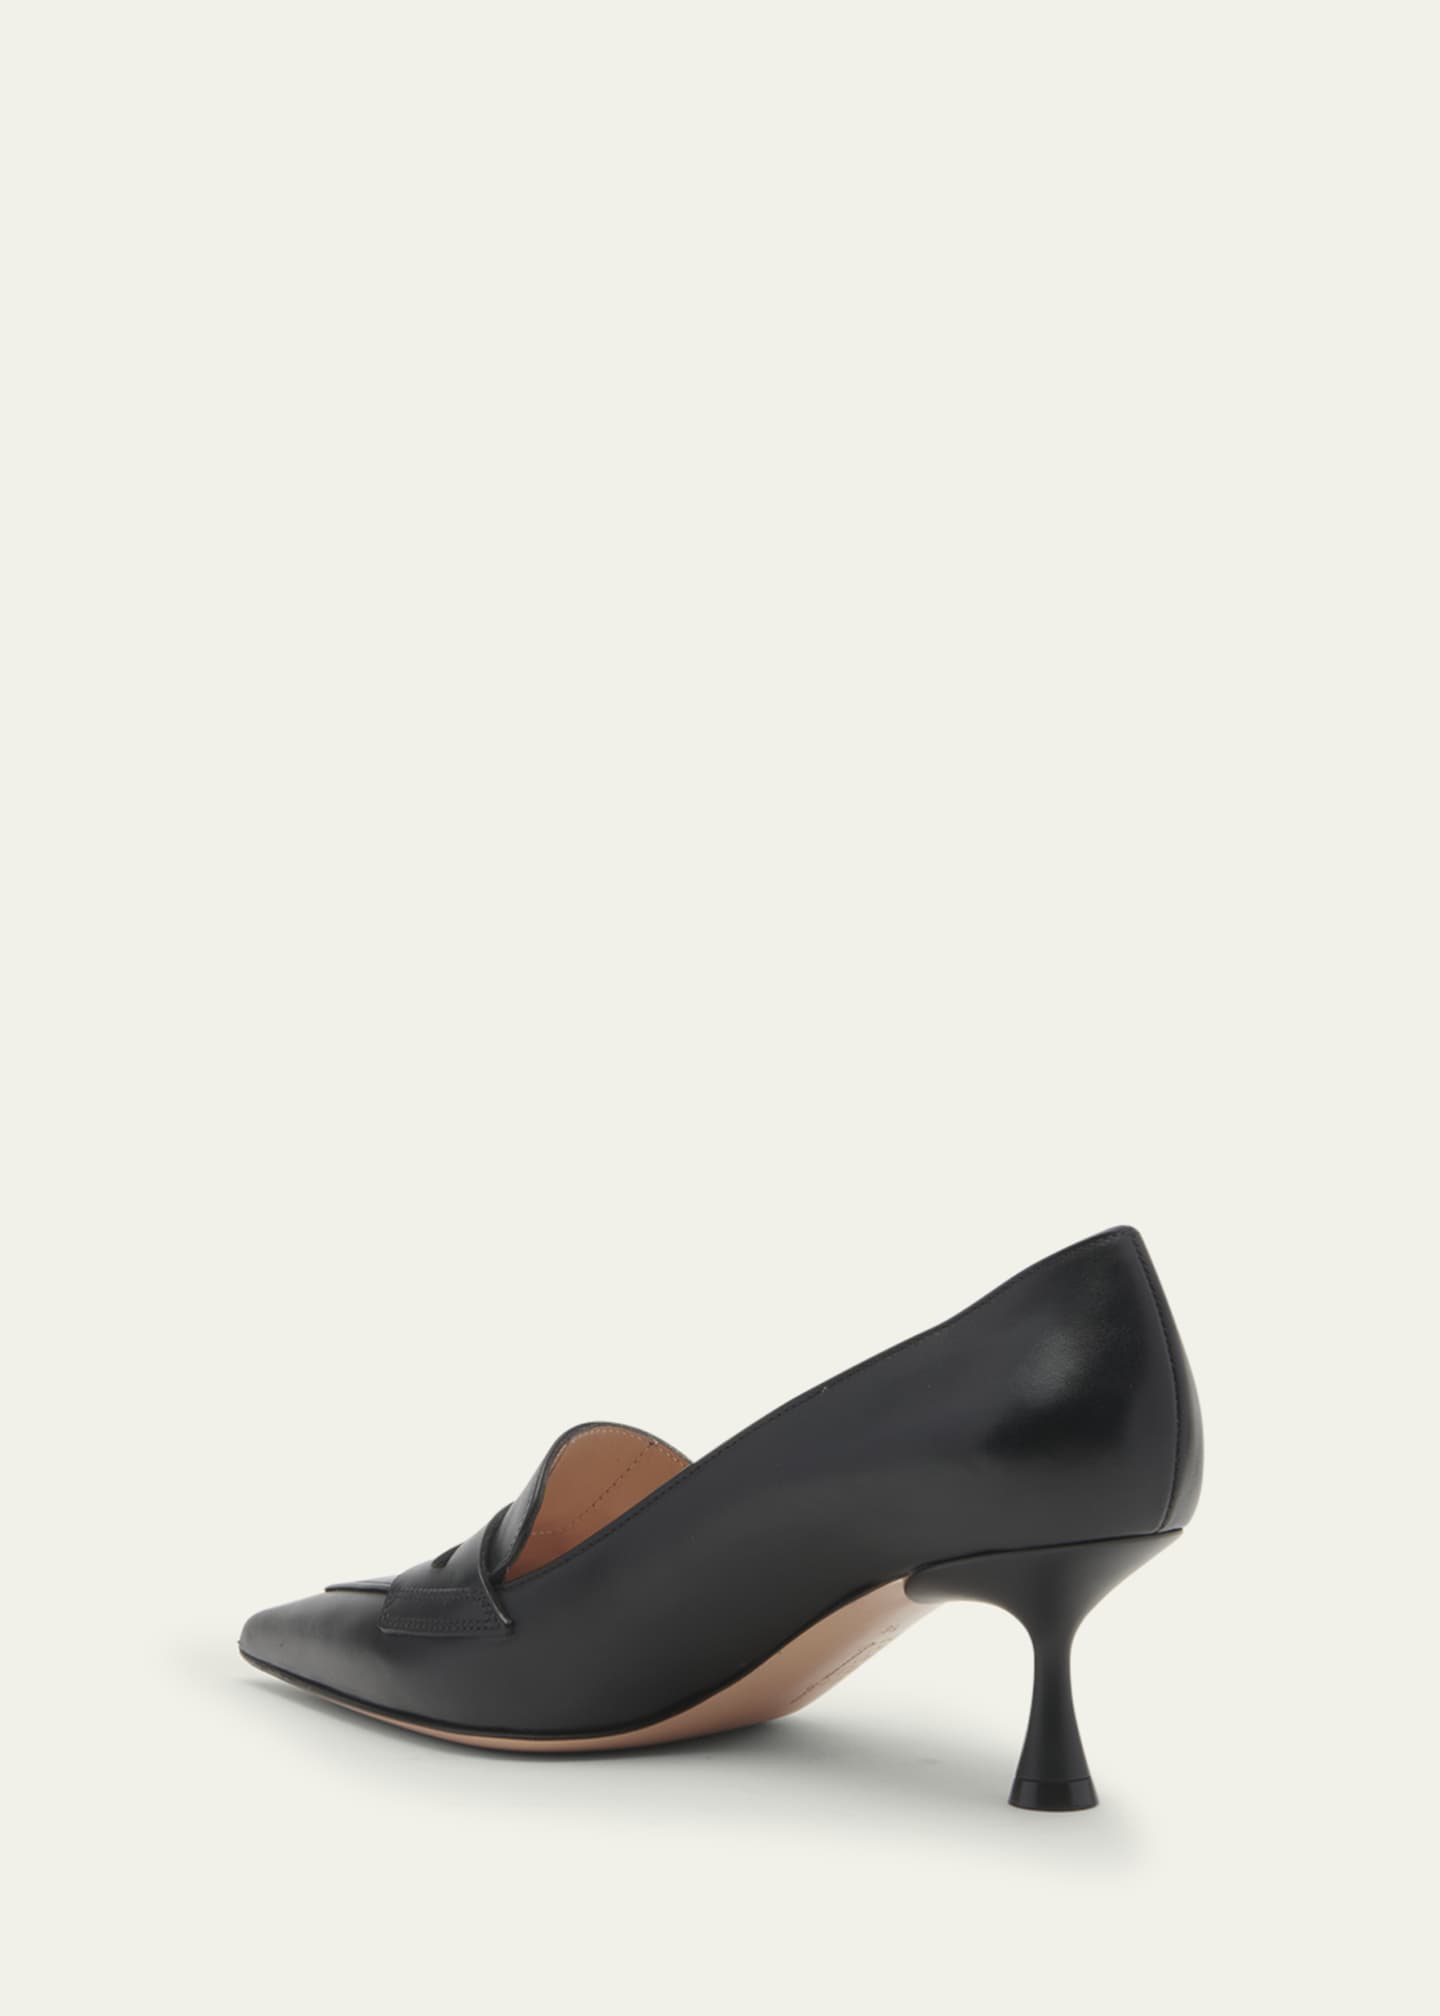 Gianvito Rossi Leather Penny Loafer Pumps - Bergdorf Goodman